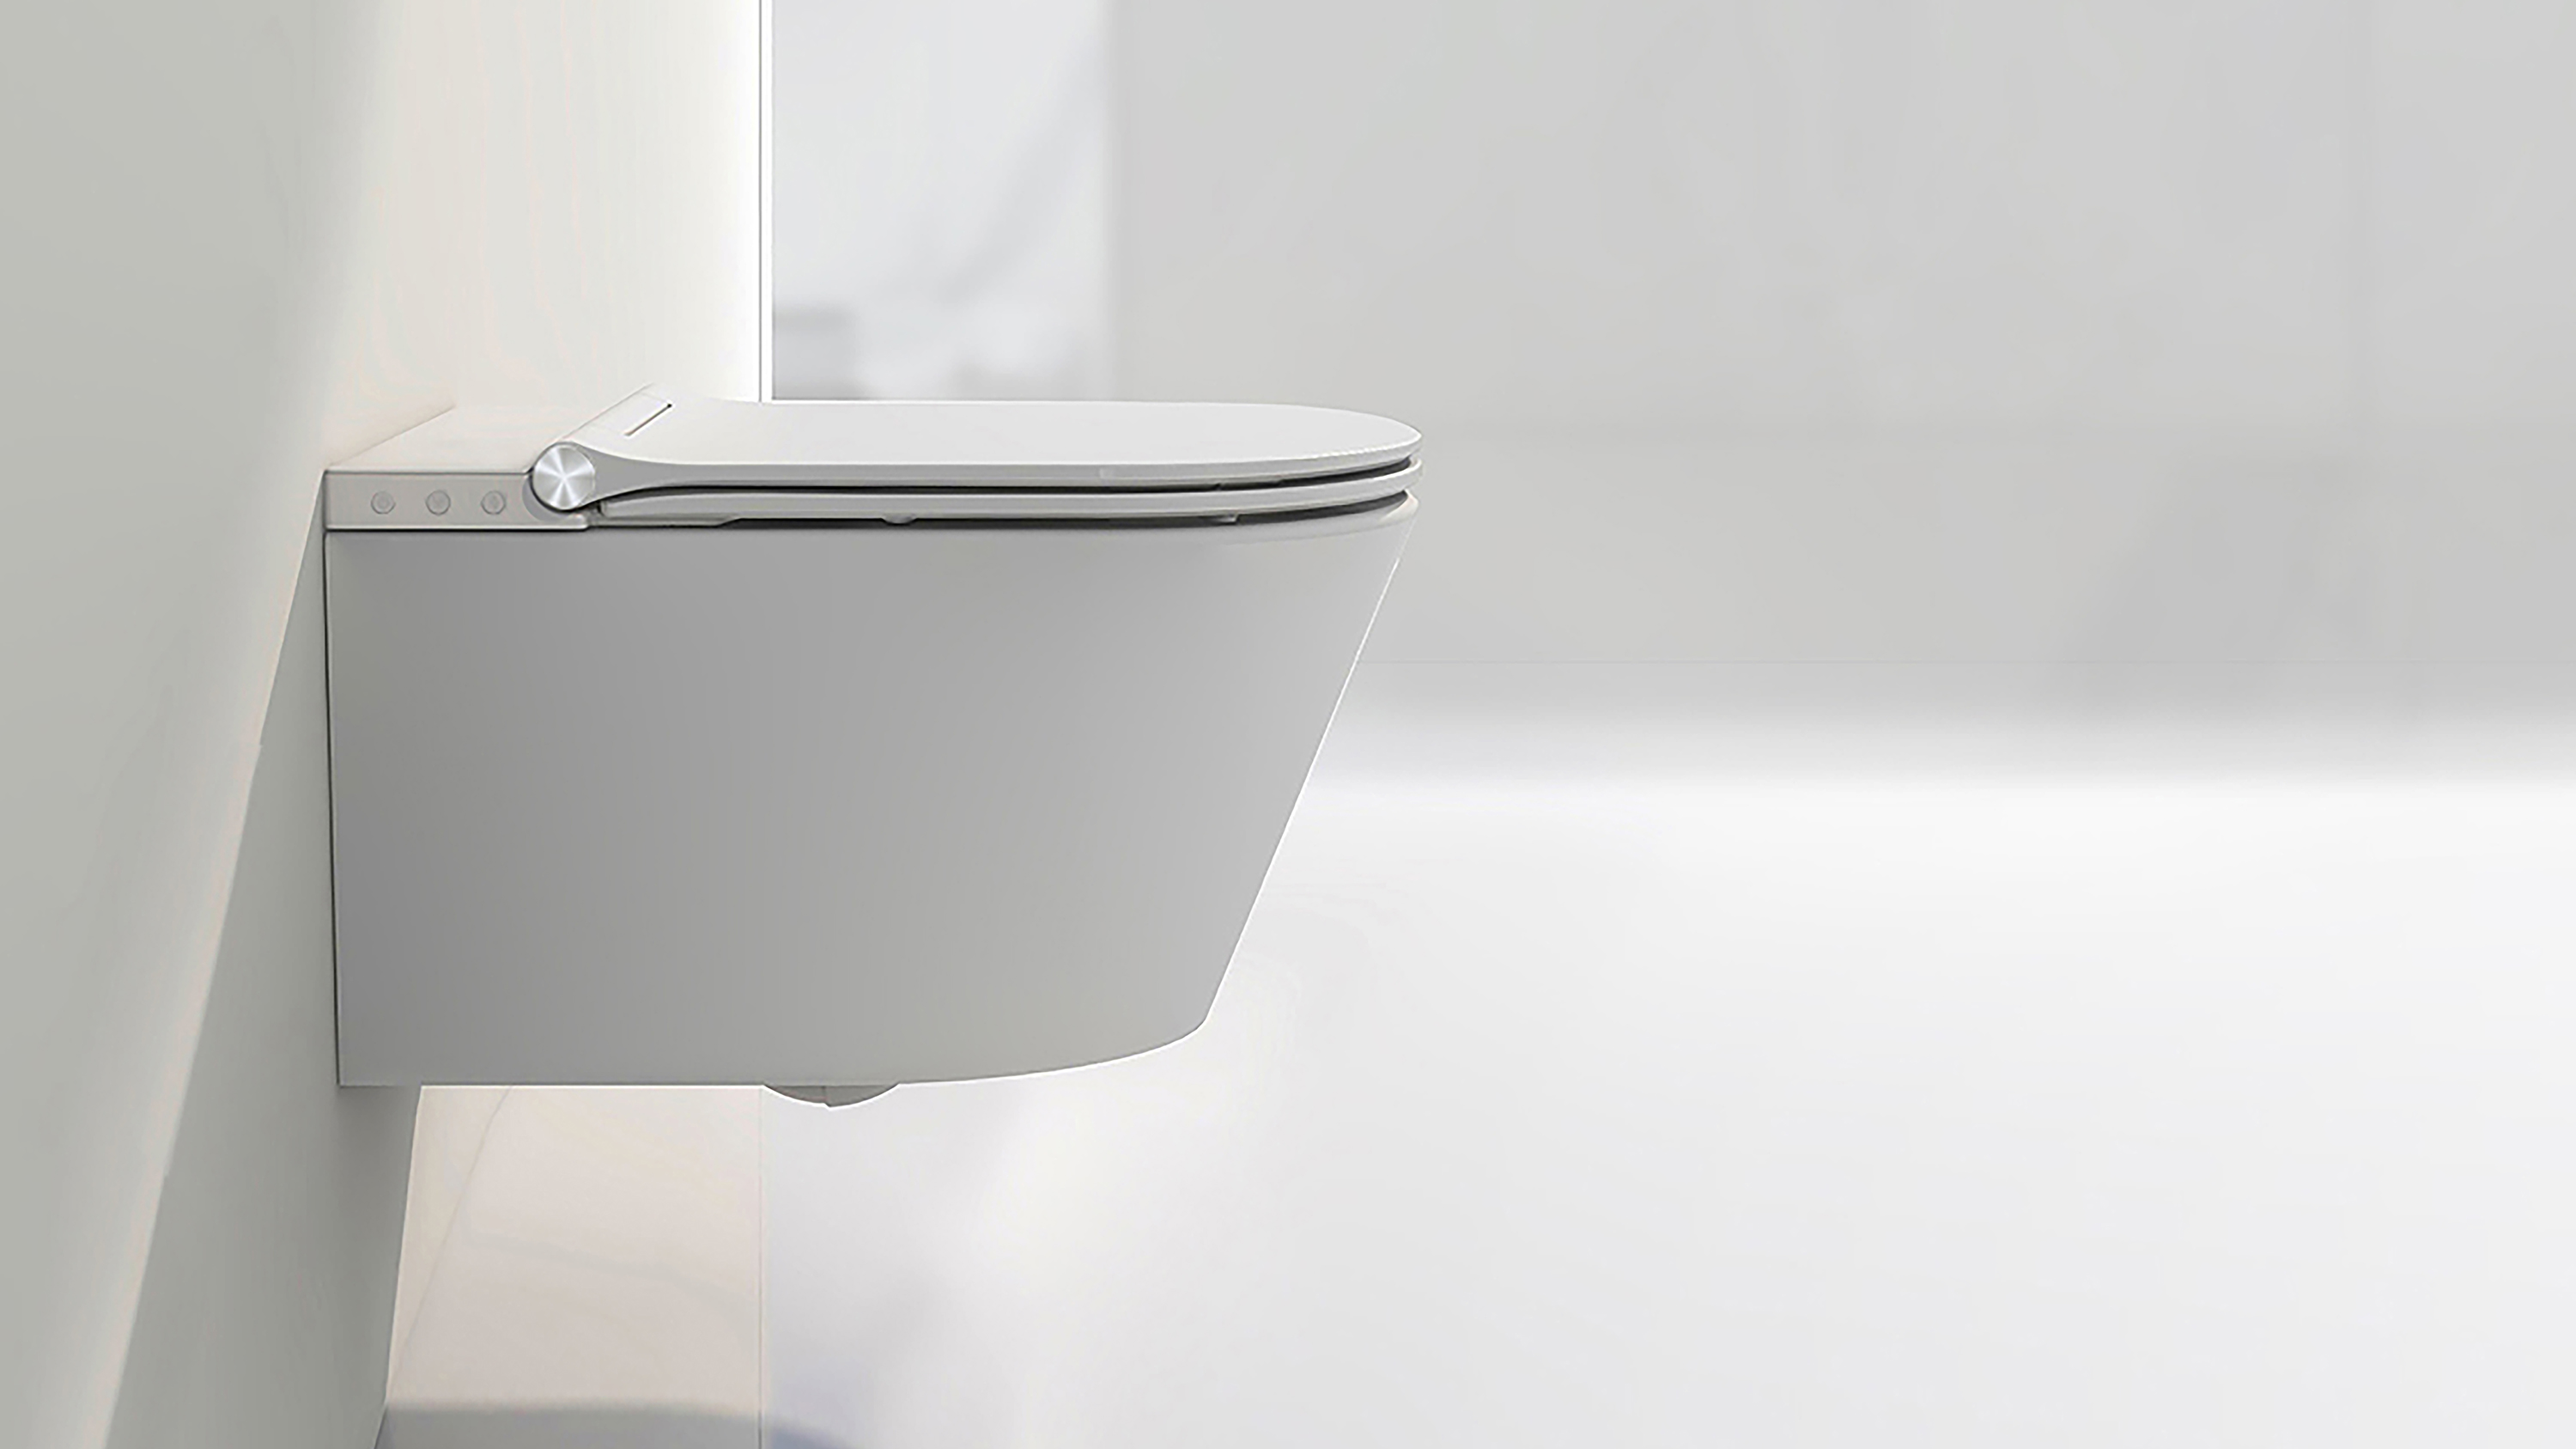 How to choose a reliable smart toilet